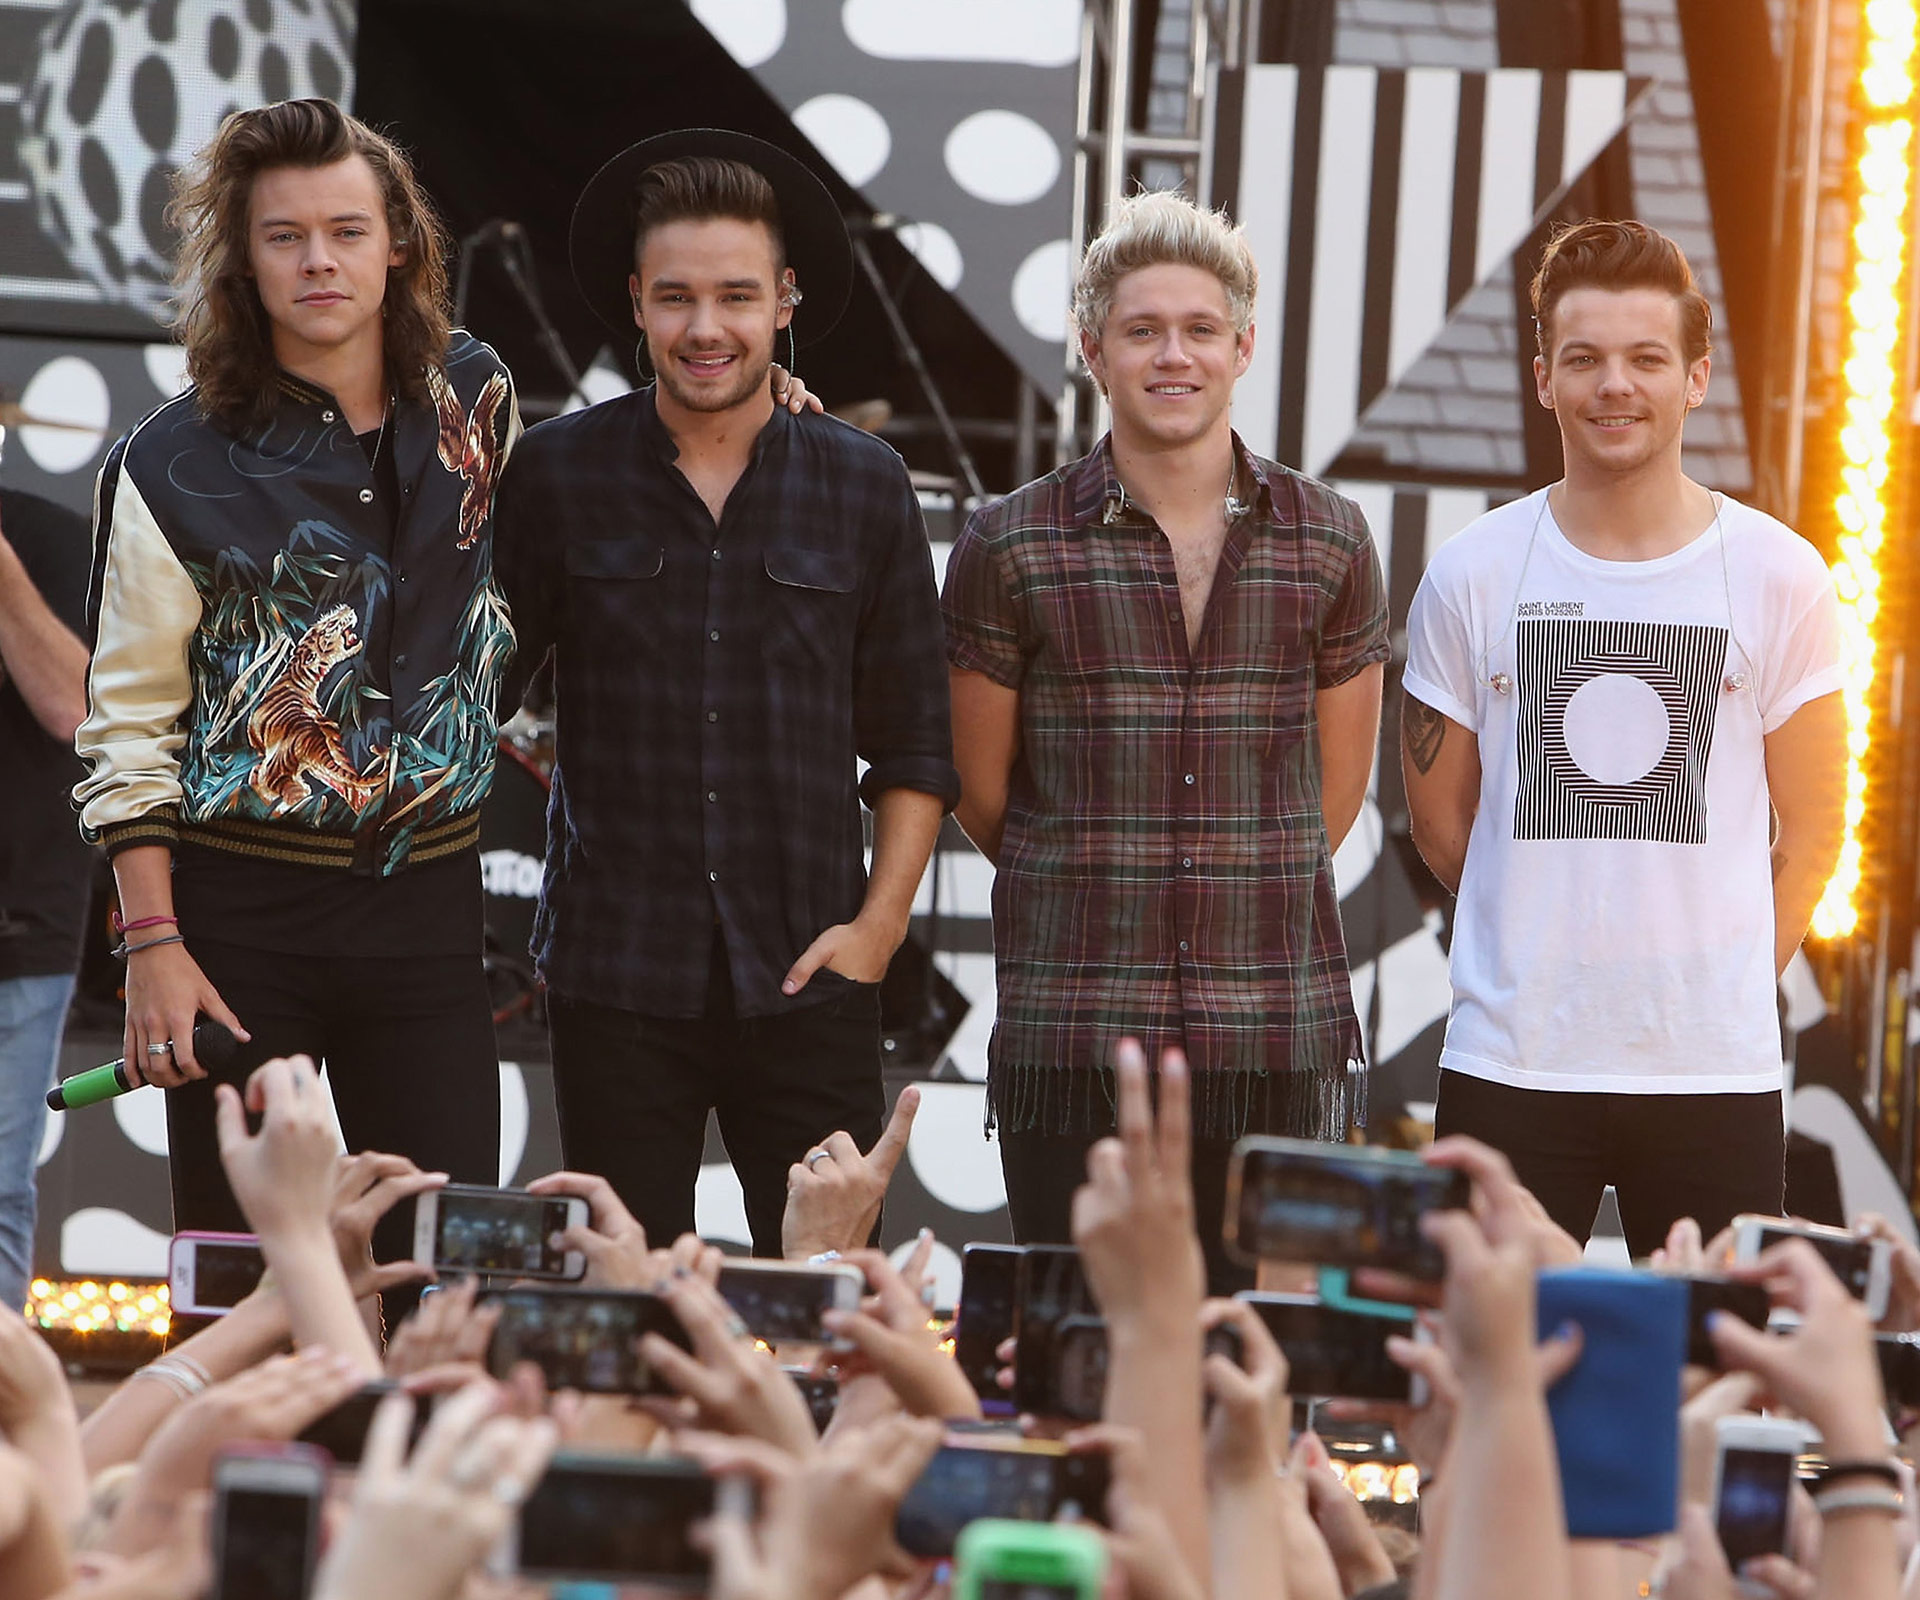 Dead-end for One Direction after the band reportedly plan to take a hiatus